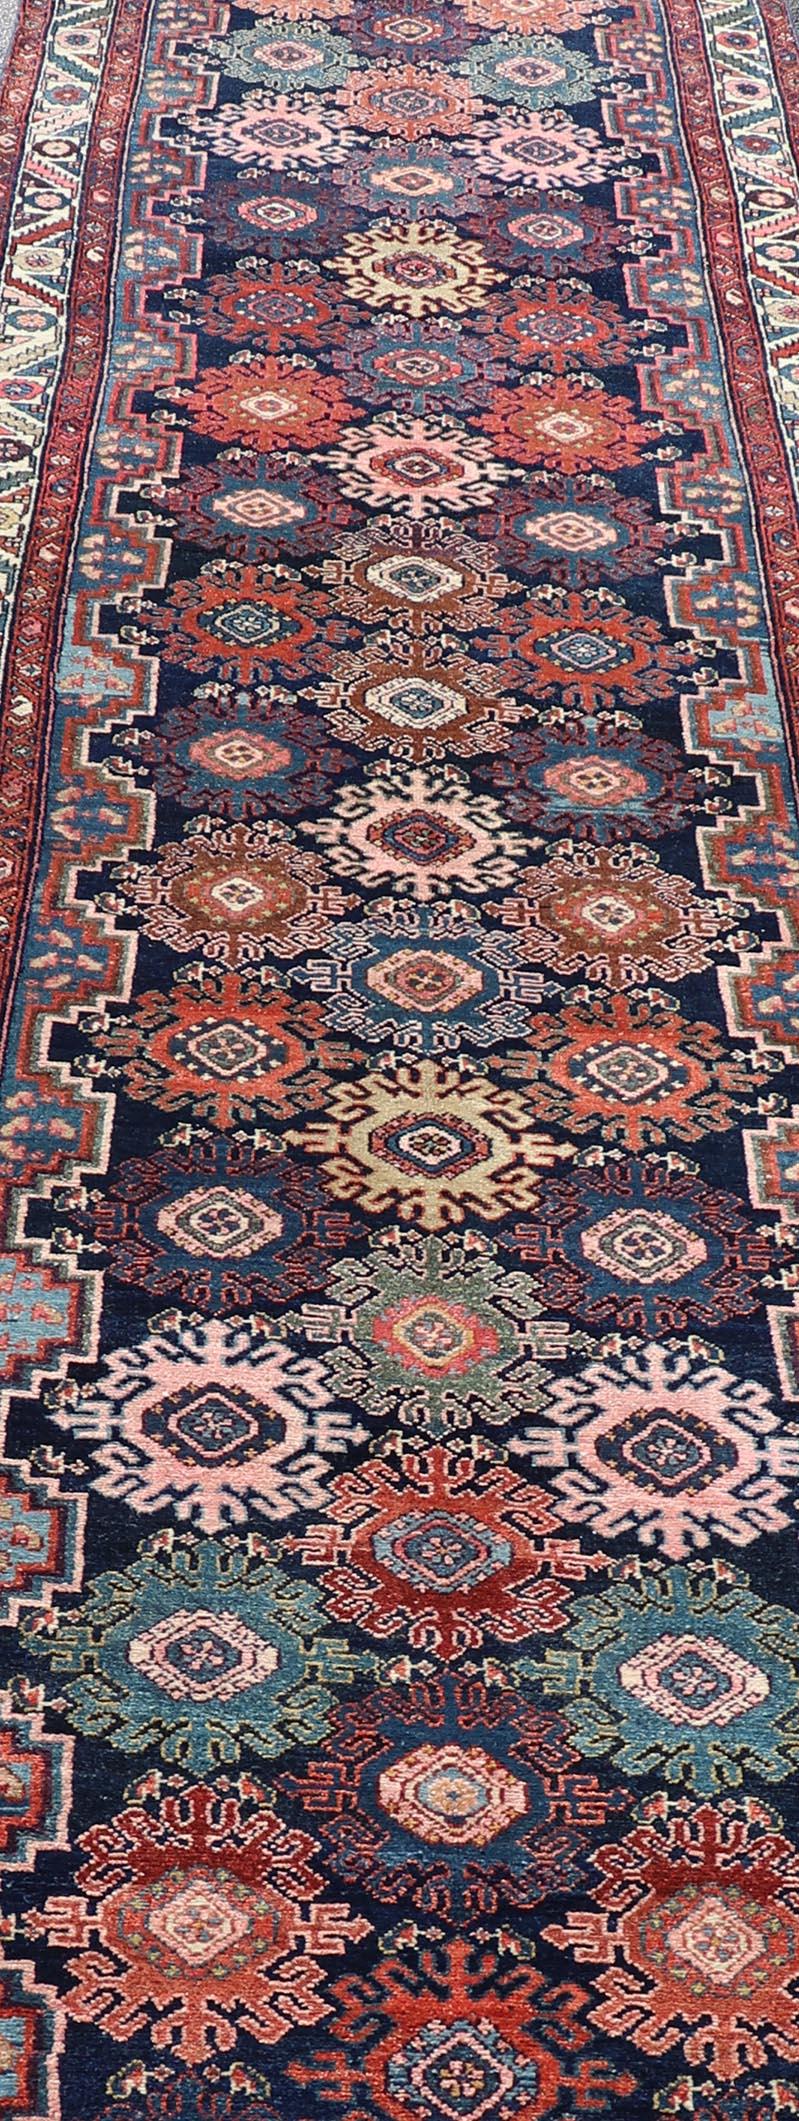 Antique Persian Hamadan Runner with All-Over Geometric Motifs In Jewel Tones For Sale 4